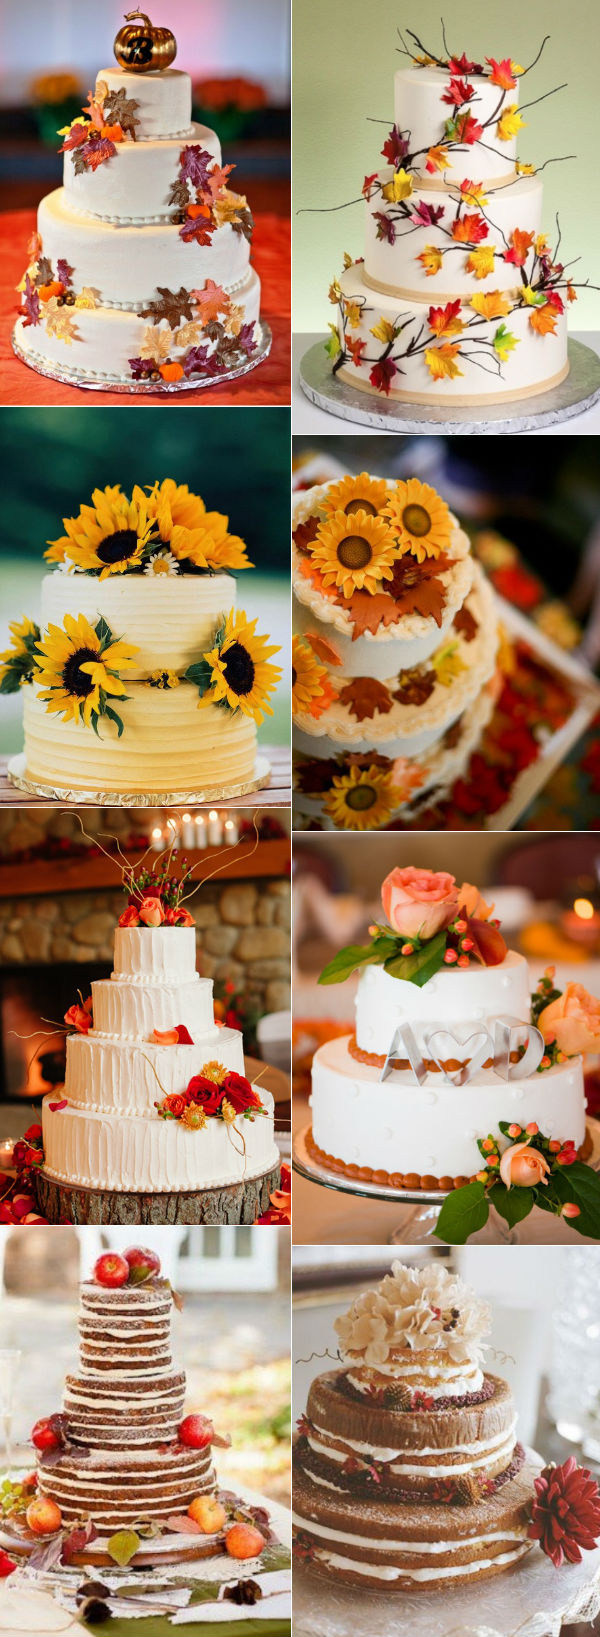 Wedding Cakes For Fall
 31 Beautiful Naked Wedding Cake Ideas For 2016